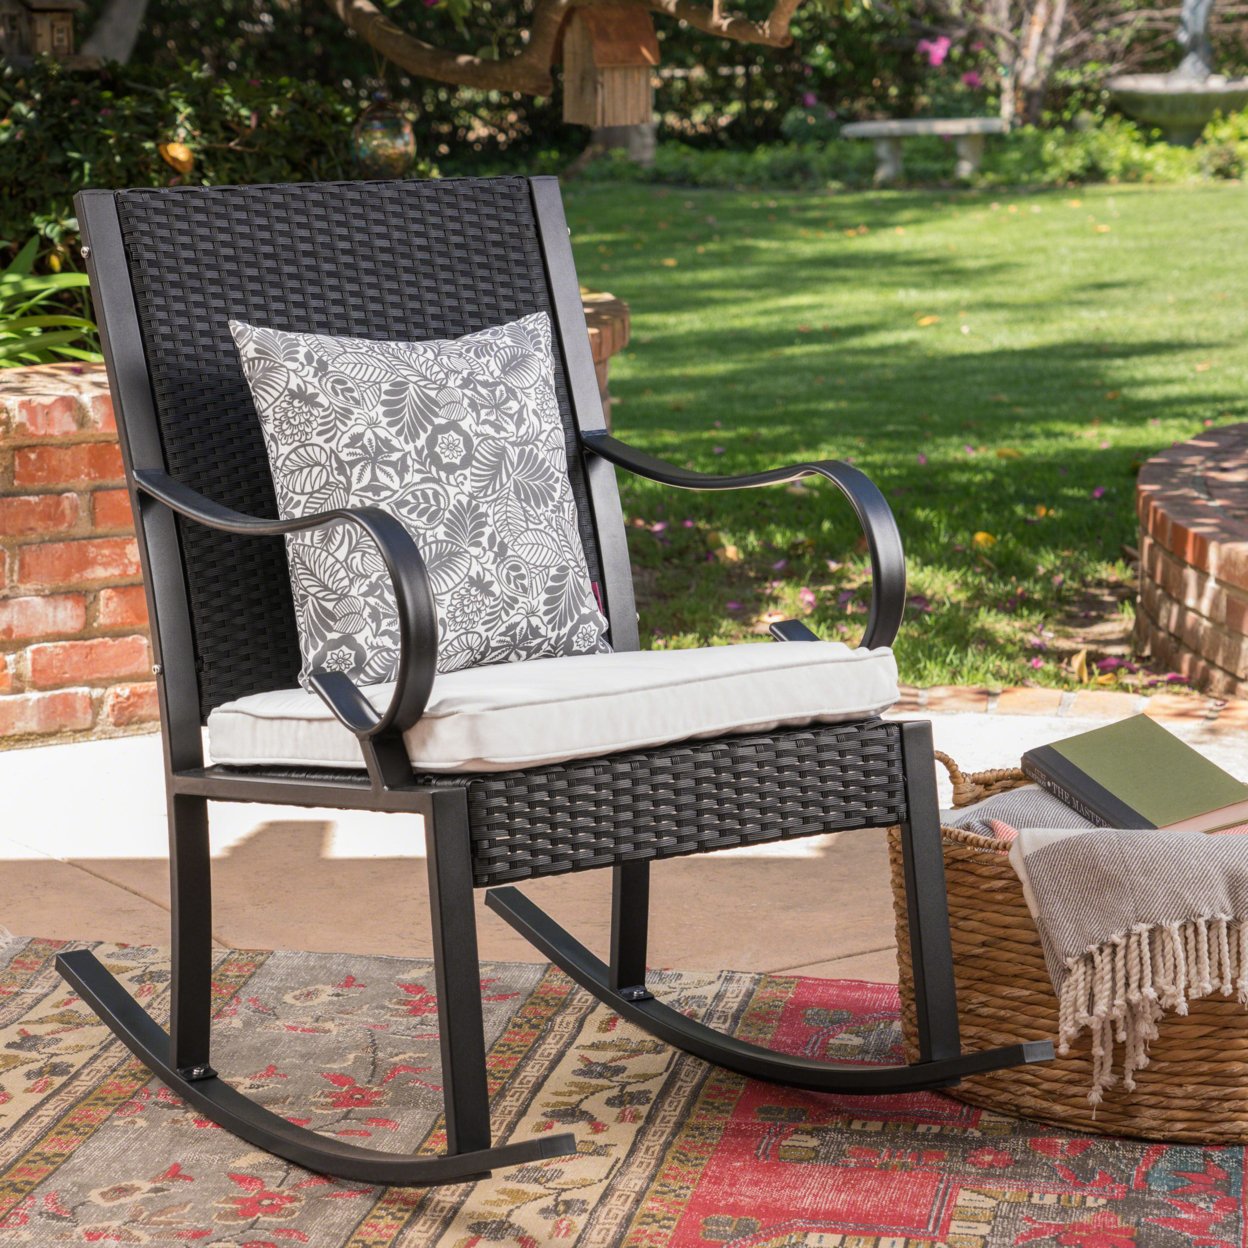 Muriel Outdoor Wicker Rocking Chair With Cushion - Black/White, Single